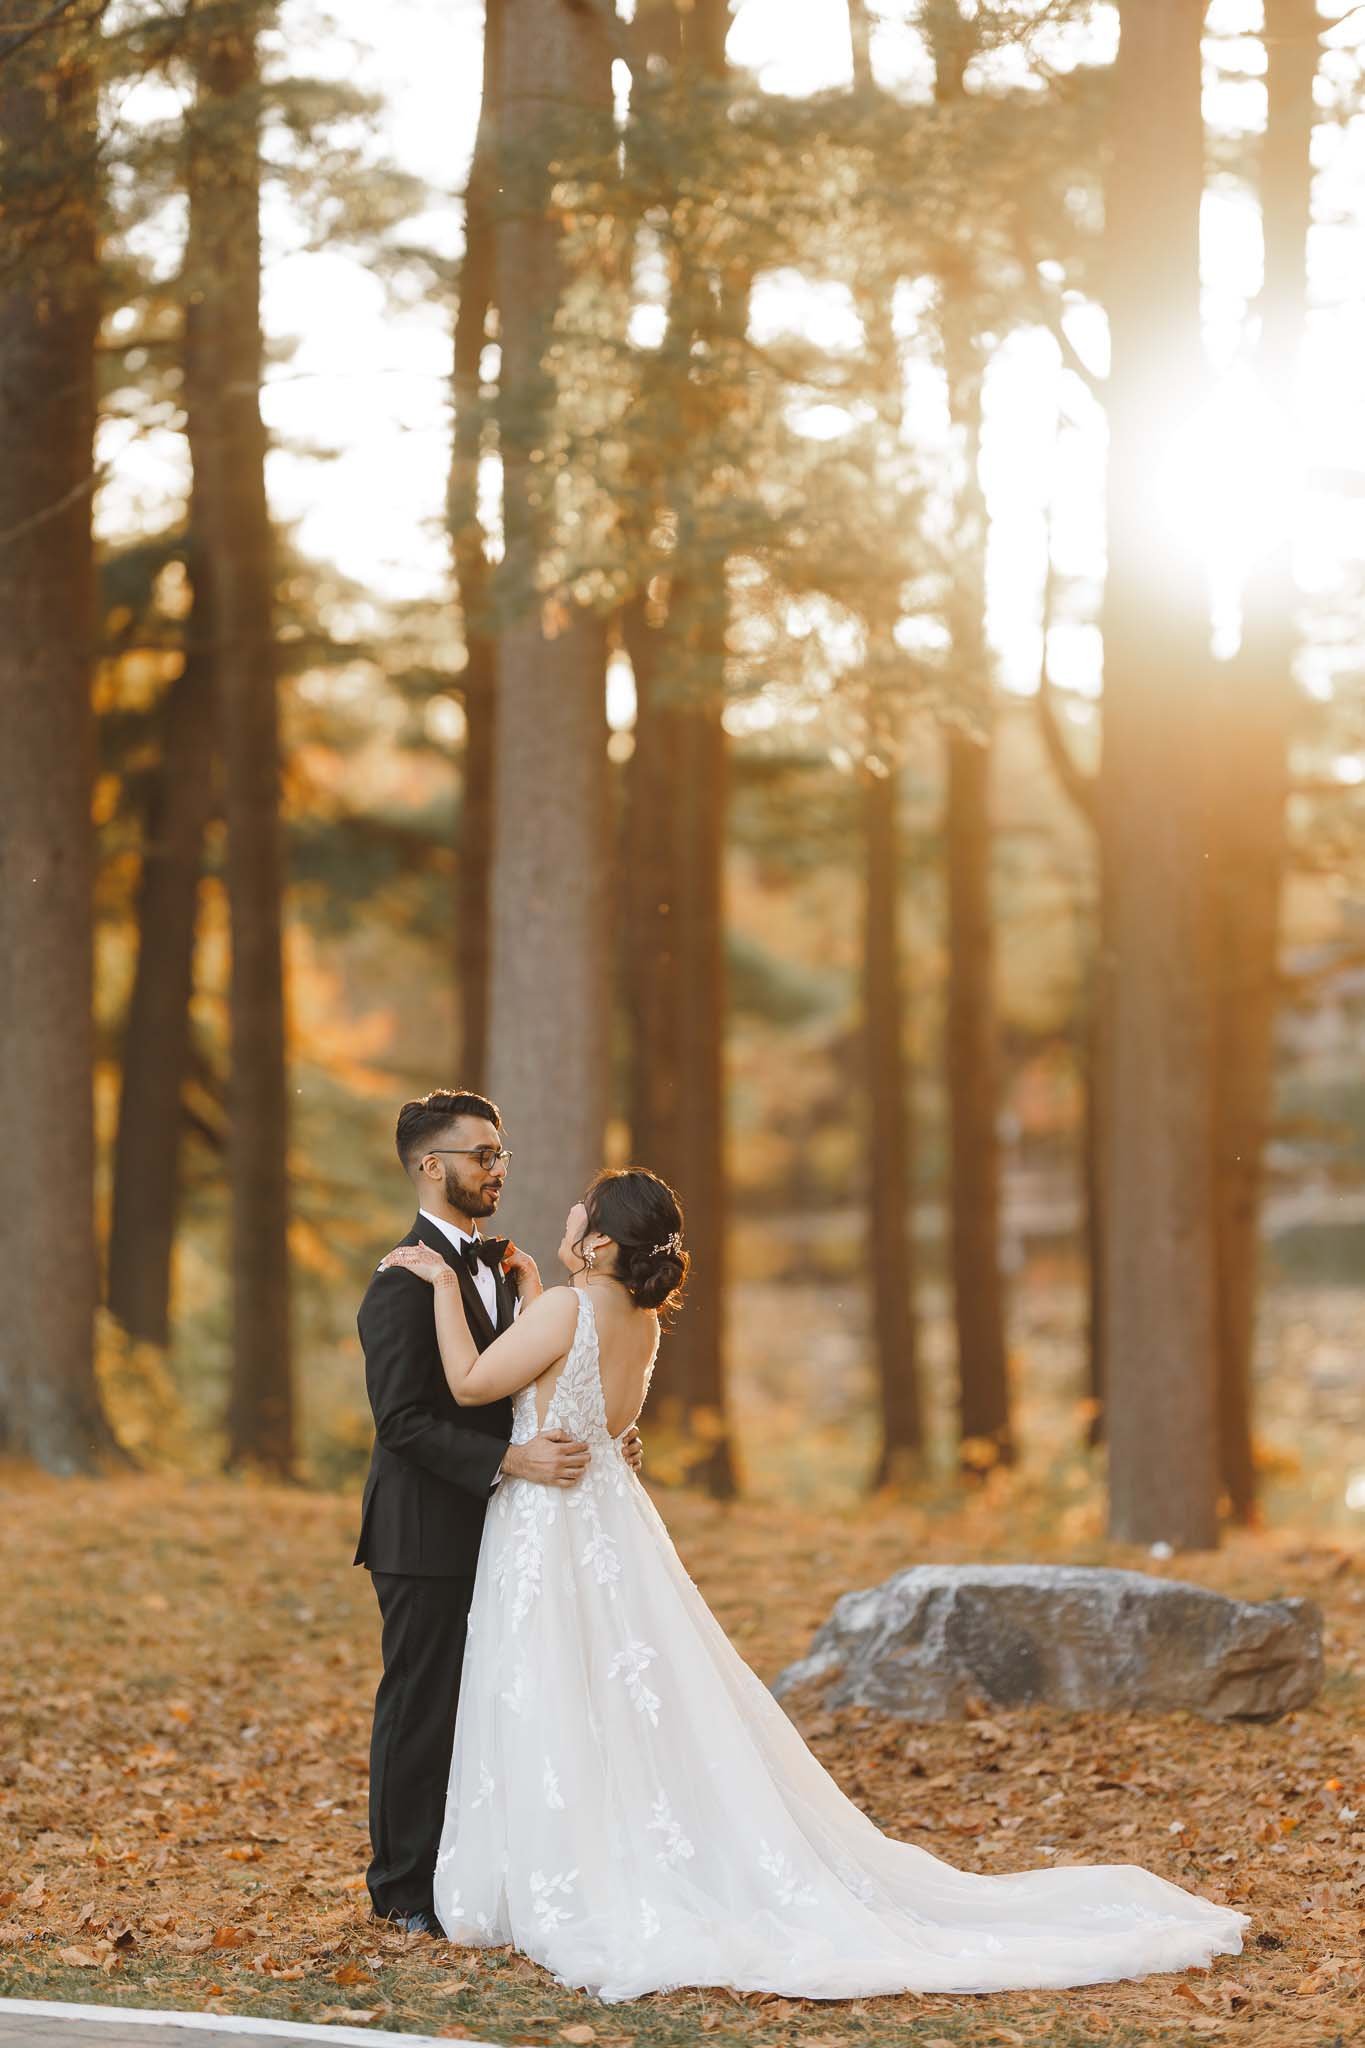 Bride and Groom posing for their portraits on their wedding day during sunset hours in fall